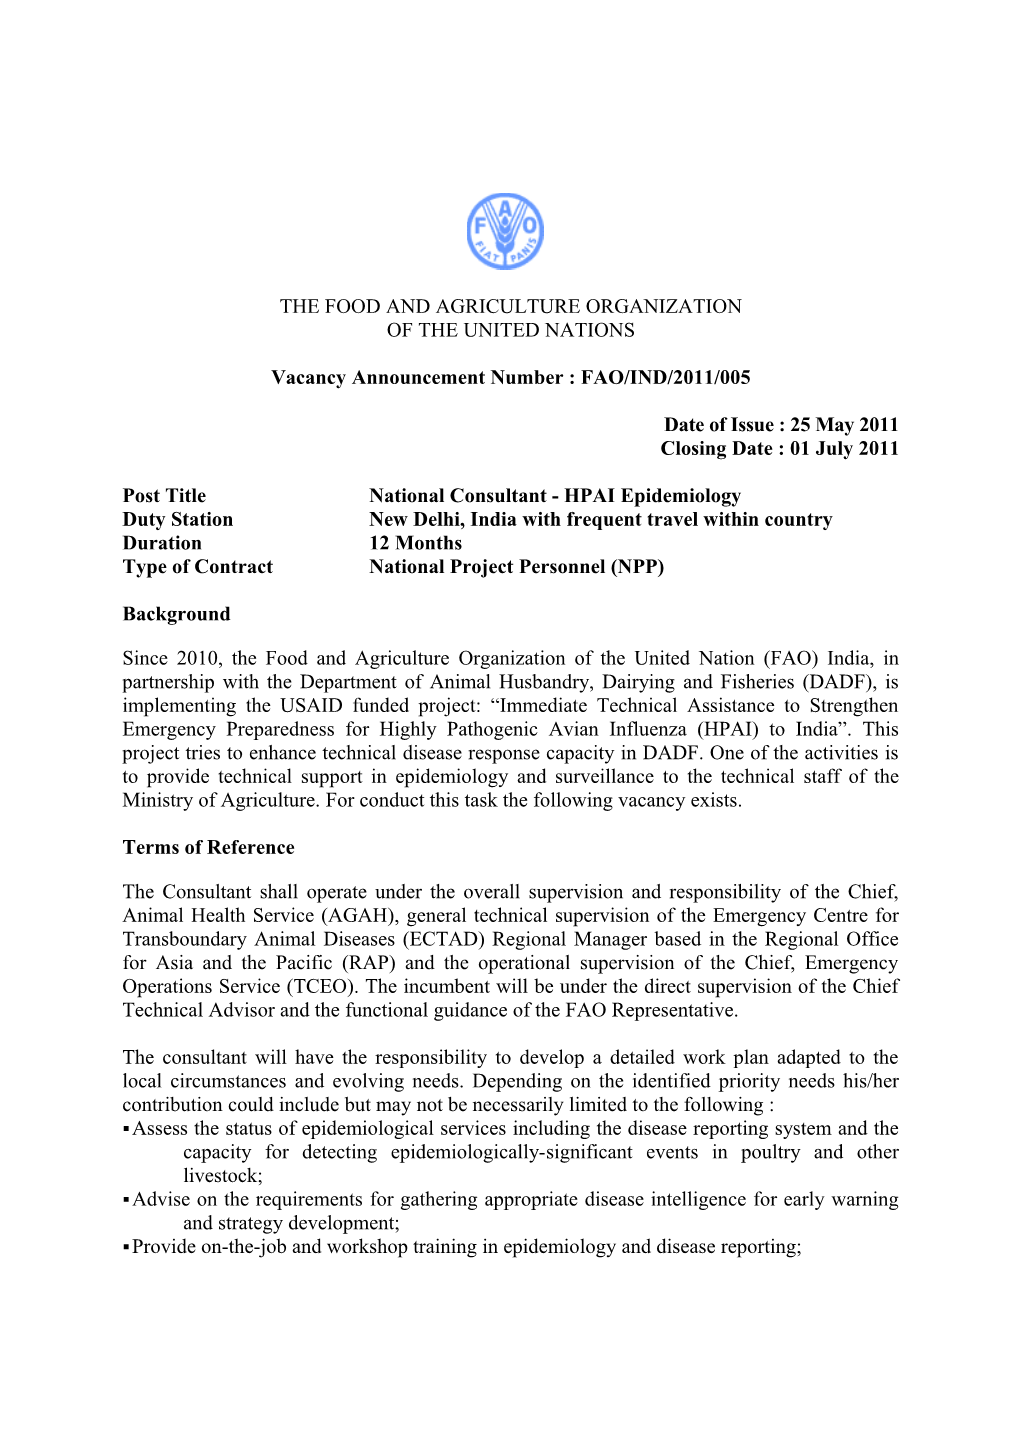 Vacancy Announcement Number: FAO/IND/2011/005